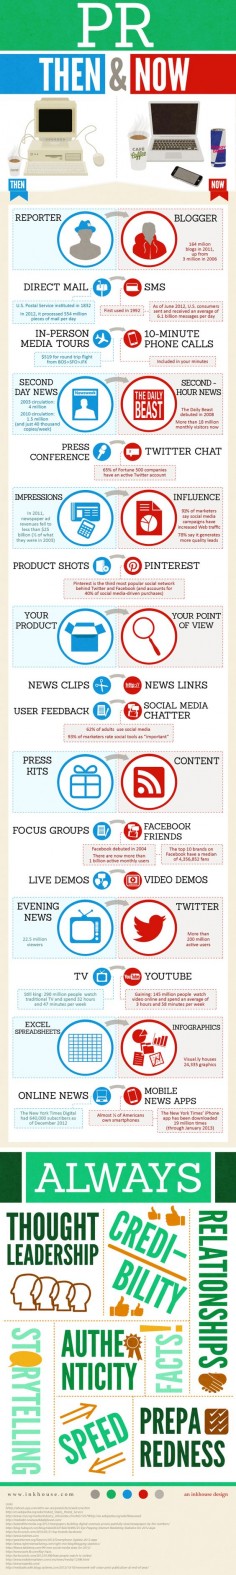 Social Media & PR: Then & Now. Great infographic detailing how digital media has shaped the public relations field.